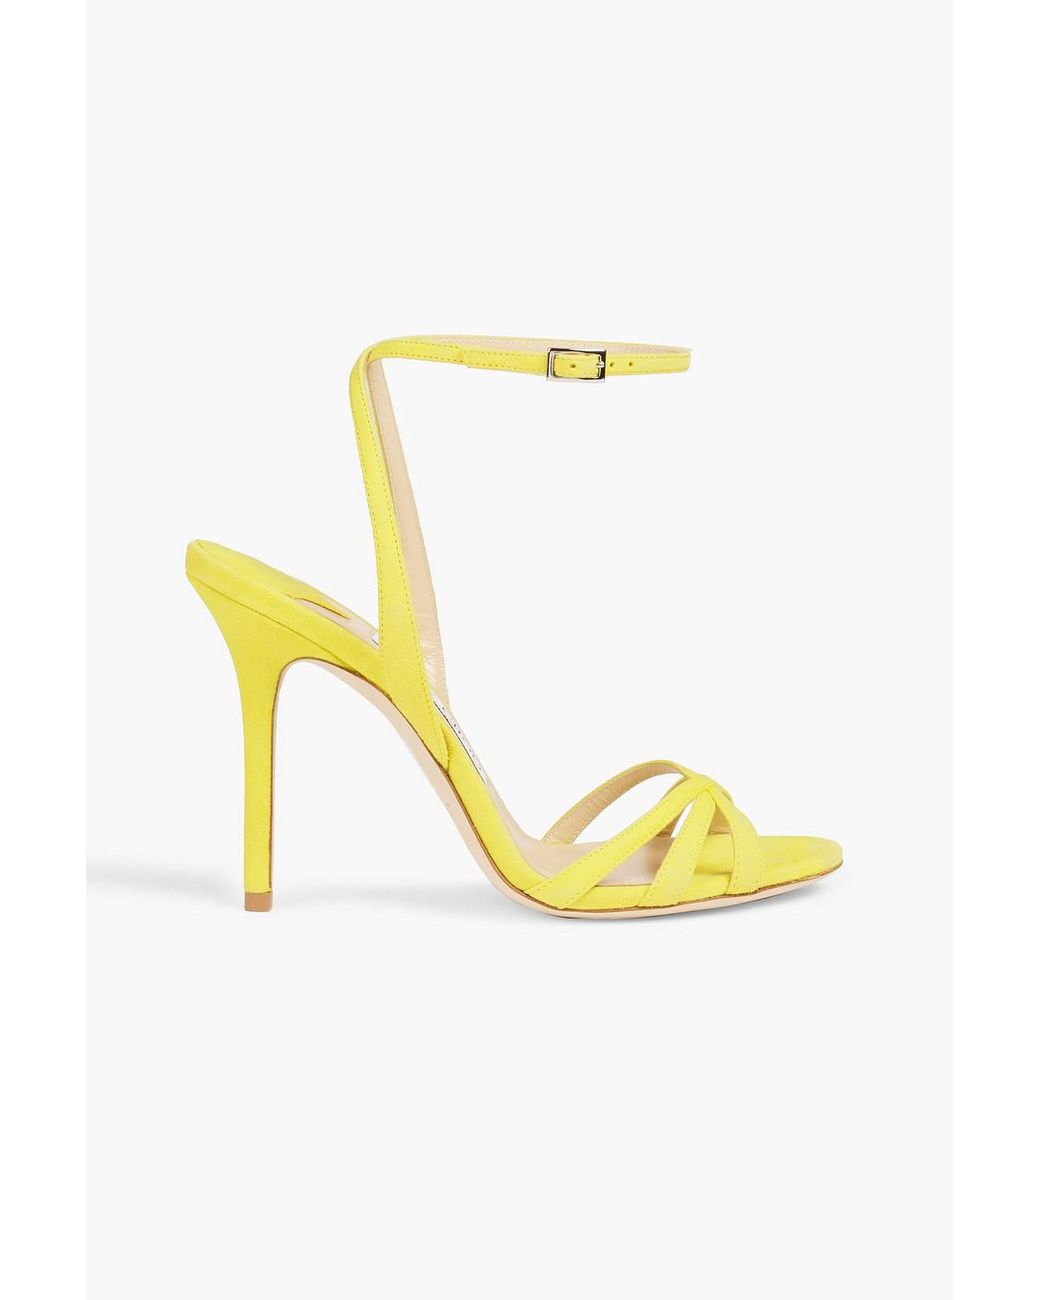 Jimmy Choo Dielle 100 Suede Sandals in Yellow | Lyst